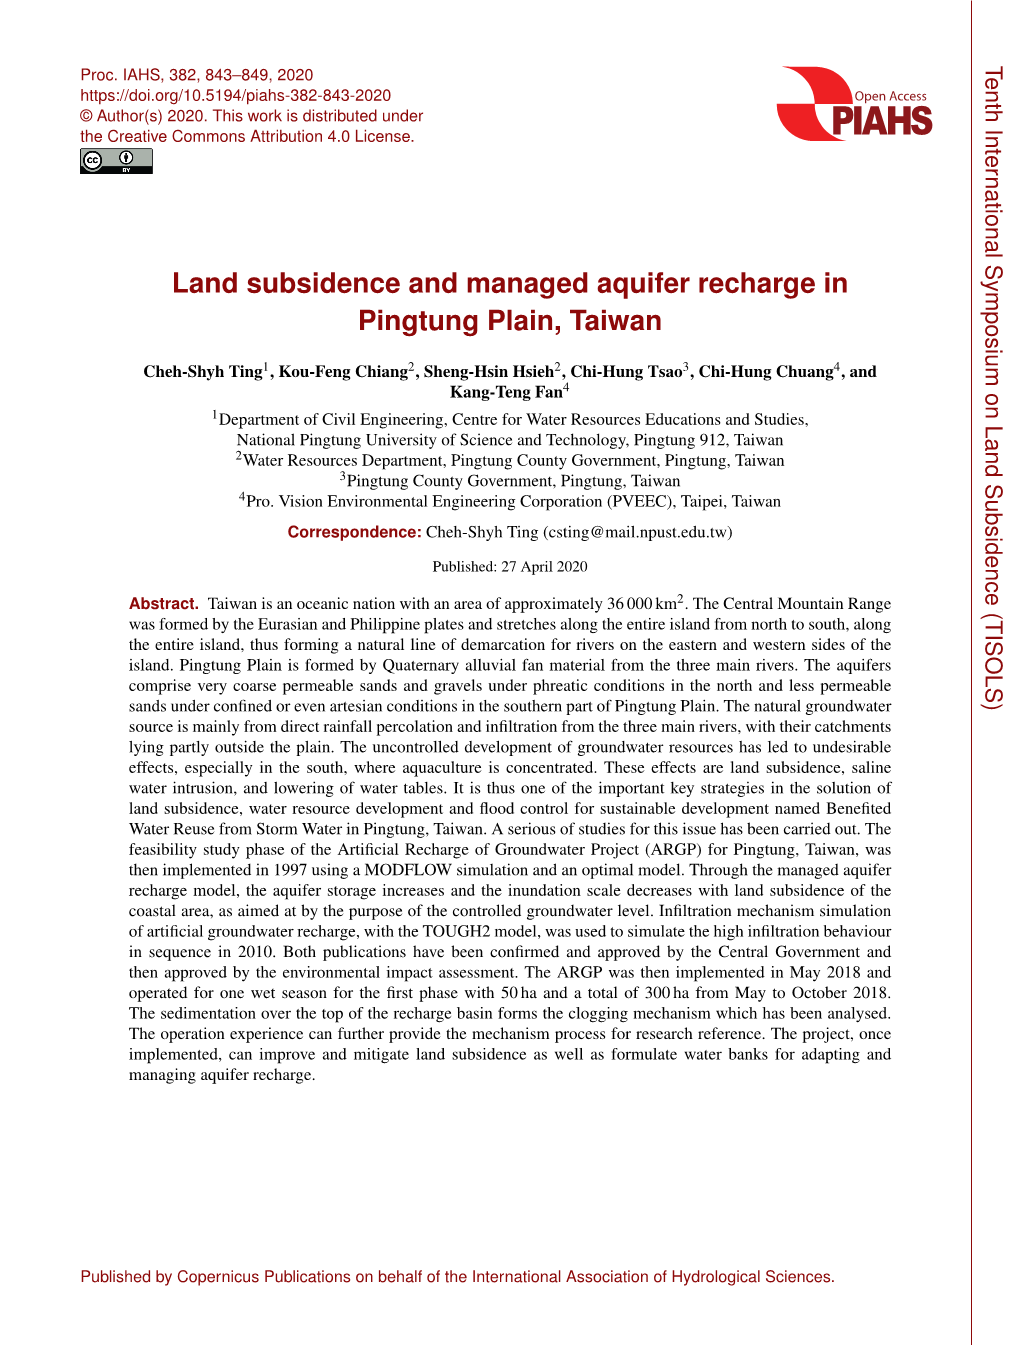 Land Subsidence and Managed Aquifer Recharge in Pingtung Plain, Taiwan